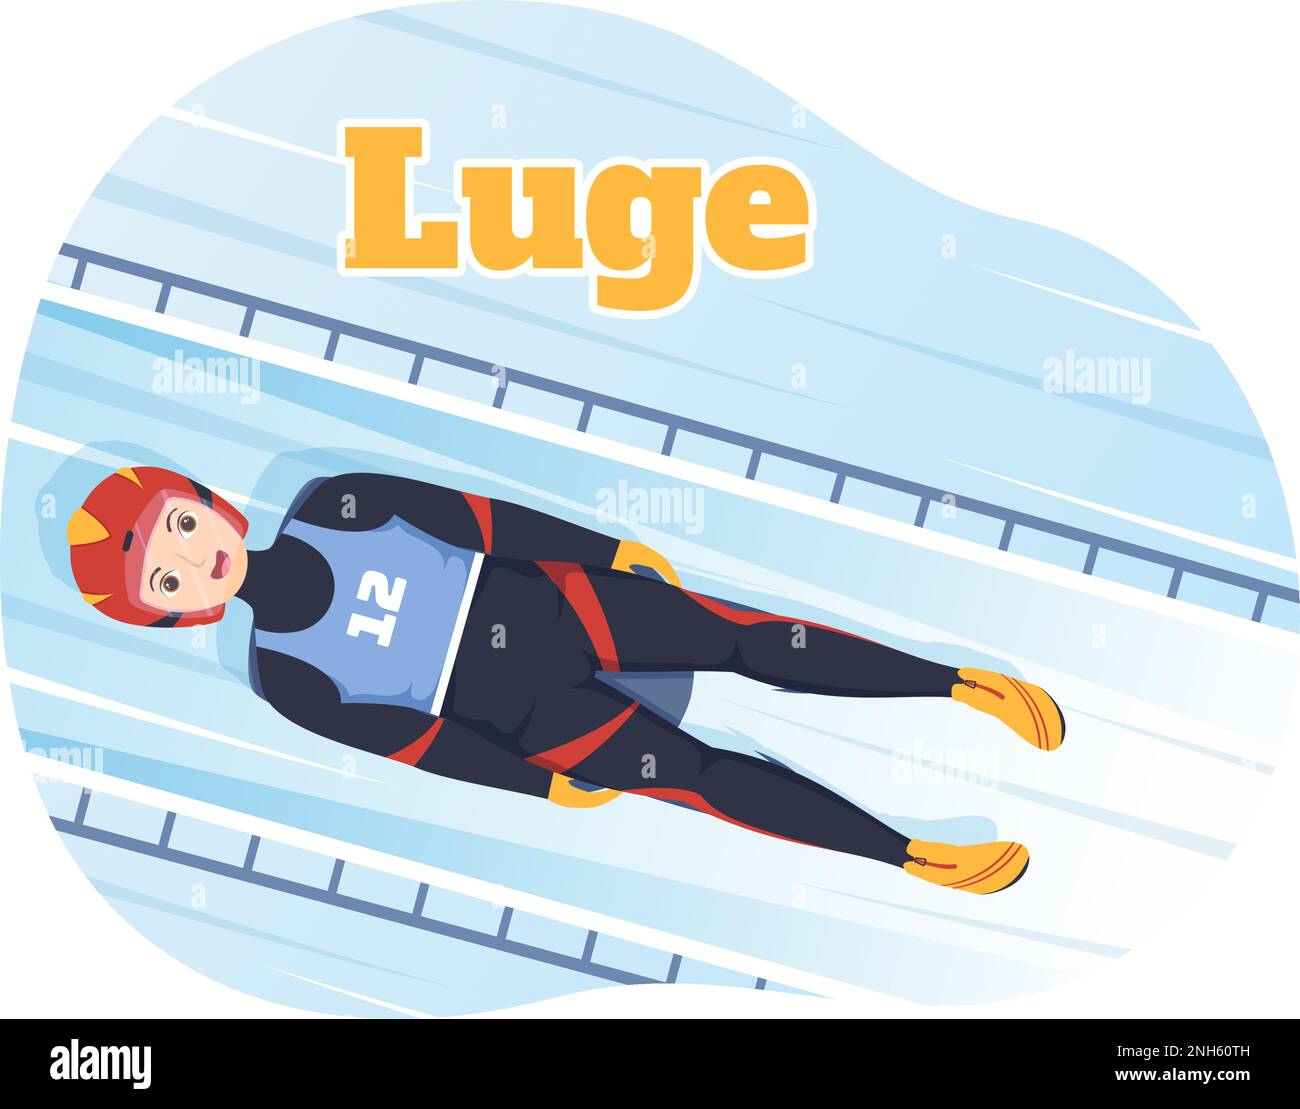 https://c8.alamy.com/comp/2NH60TH/luge-sled-race-athlete-winter-sport-illustration-with-riding-a-sledding-ice-and-bobsleigh-in-flat-cartoon-hand-drawn-for-landing-page-templates-2NH60TH.jpg